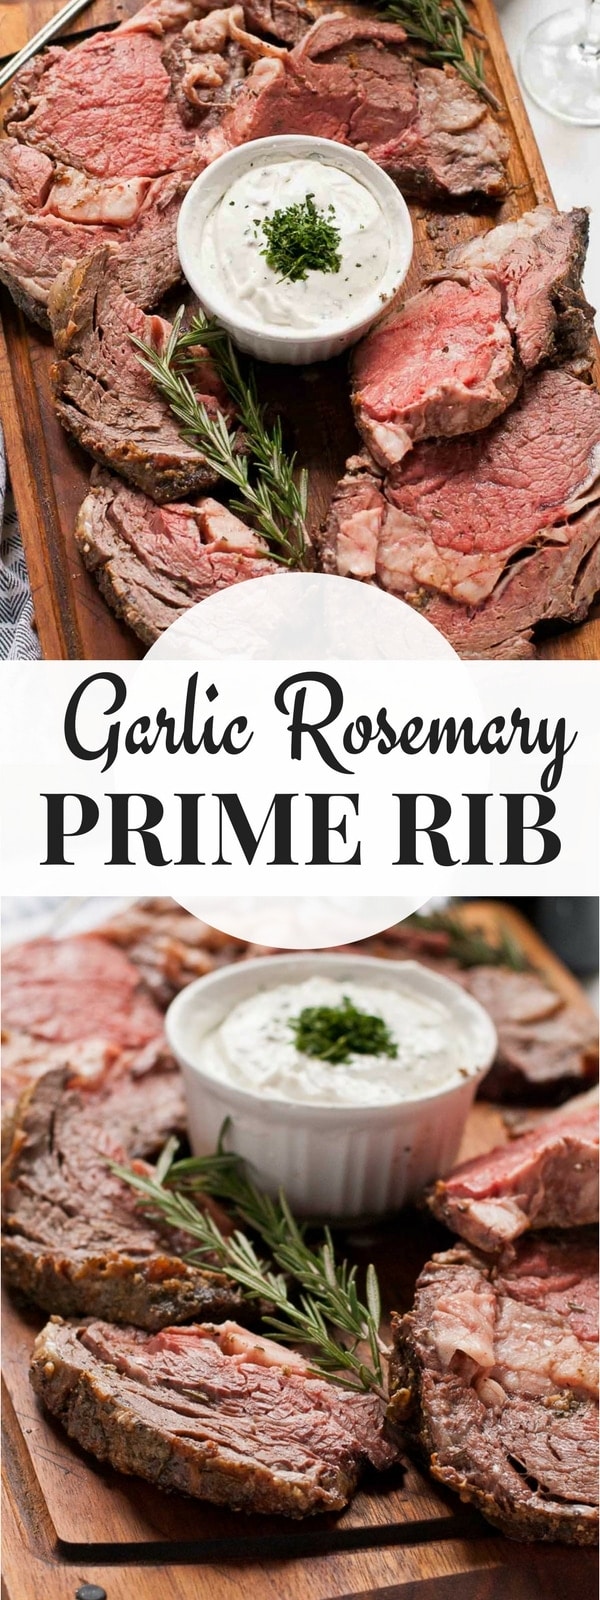 This Rosemary and Garlic Prime Rib Roast is a show stopping holiday dinner! Served with a creamy horseradish sauce, this rib roast will have everyone begging for more!